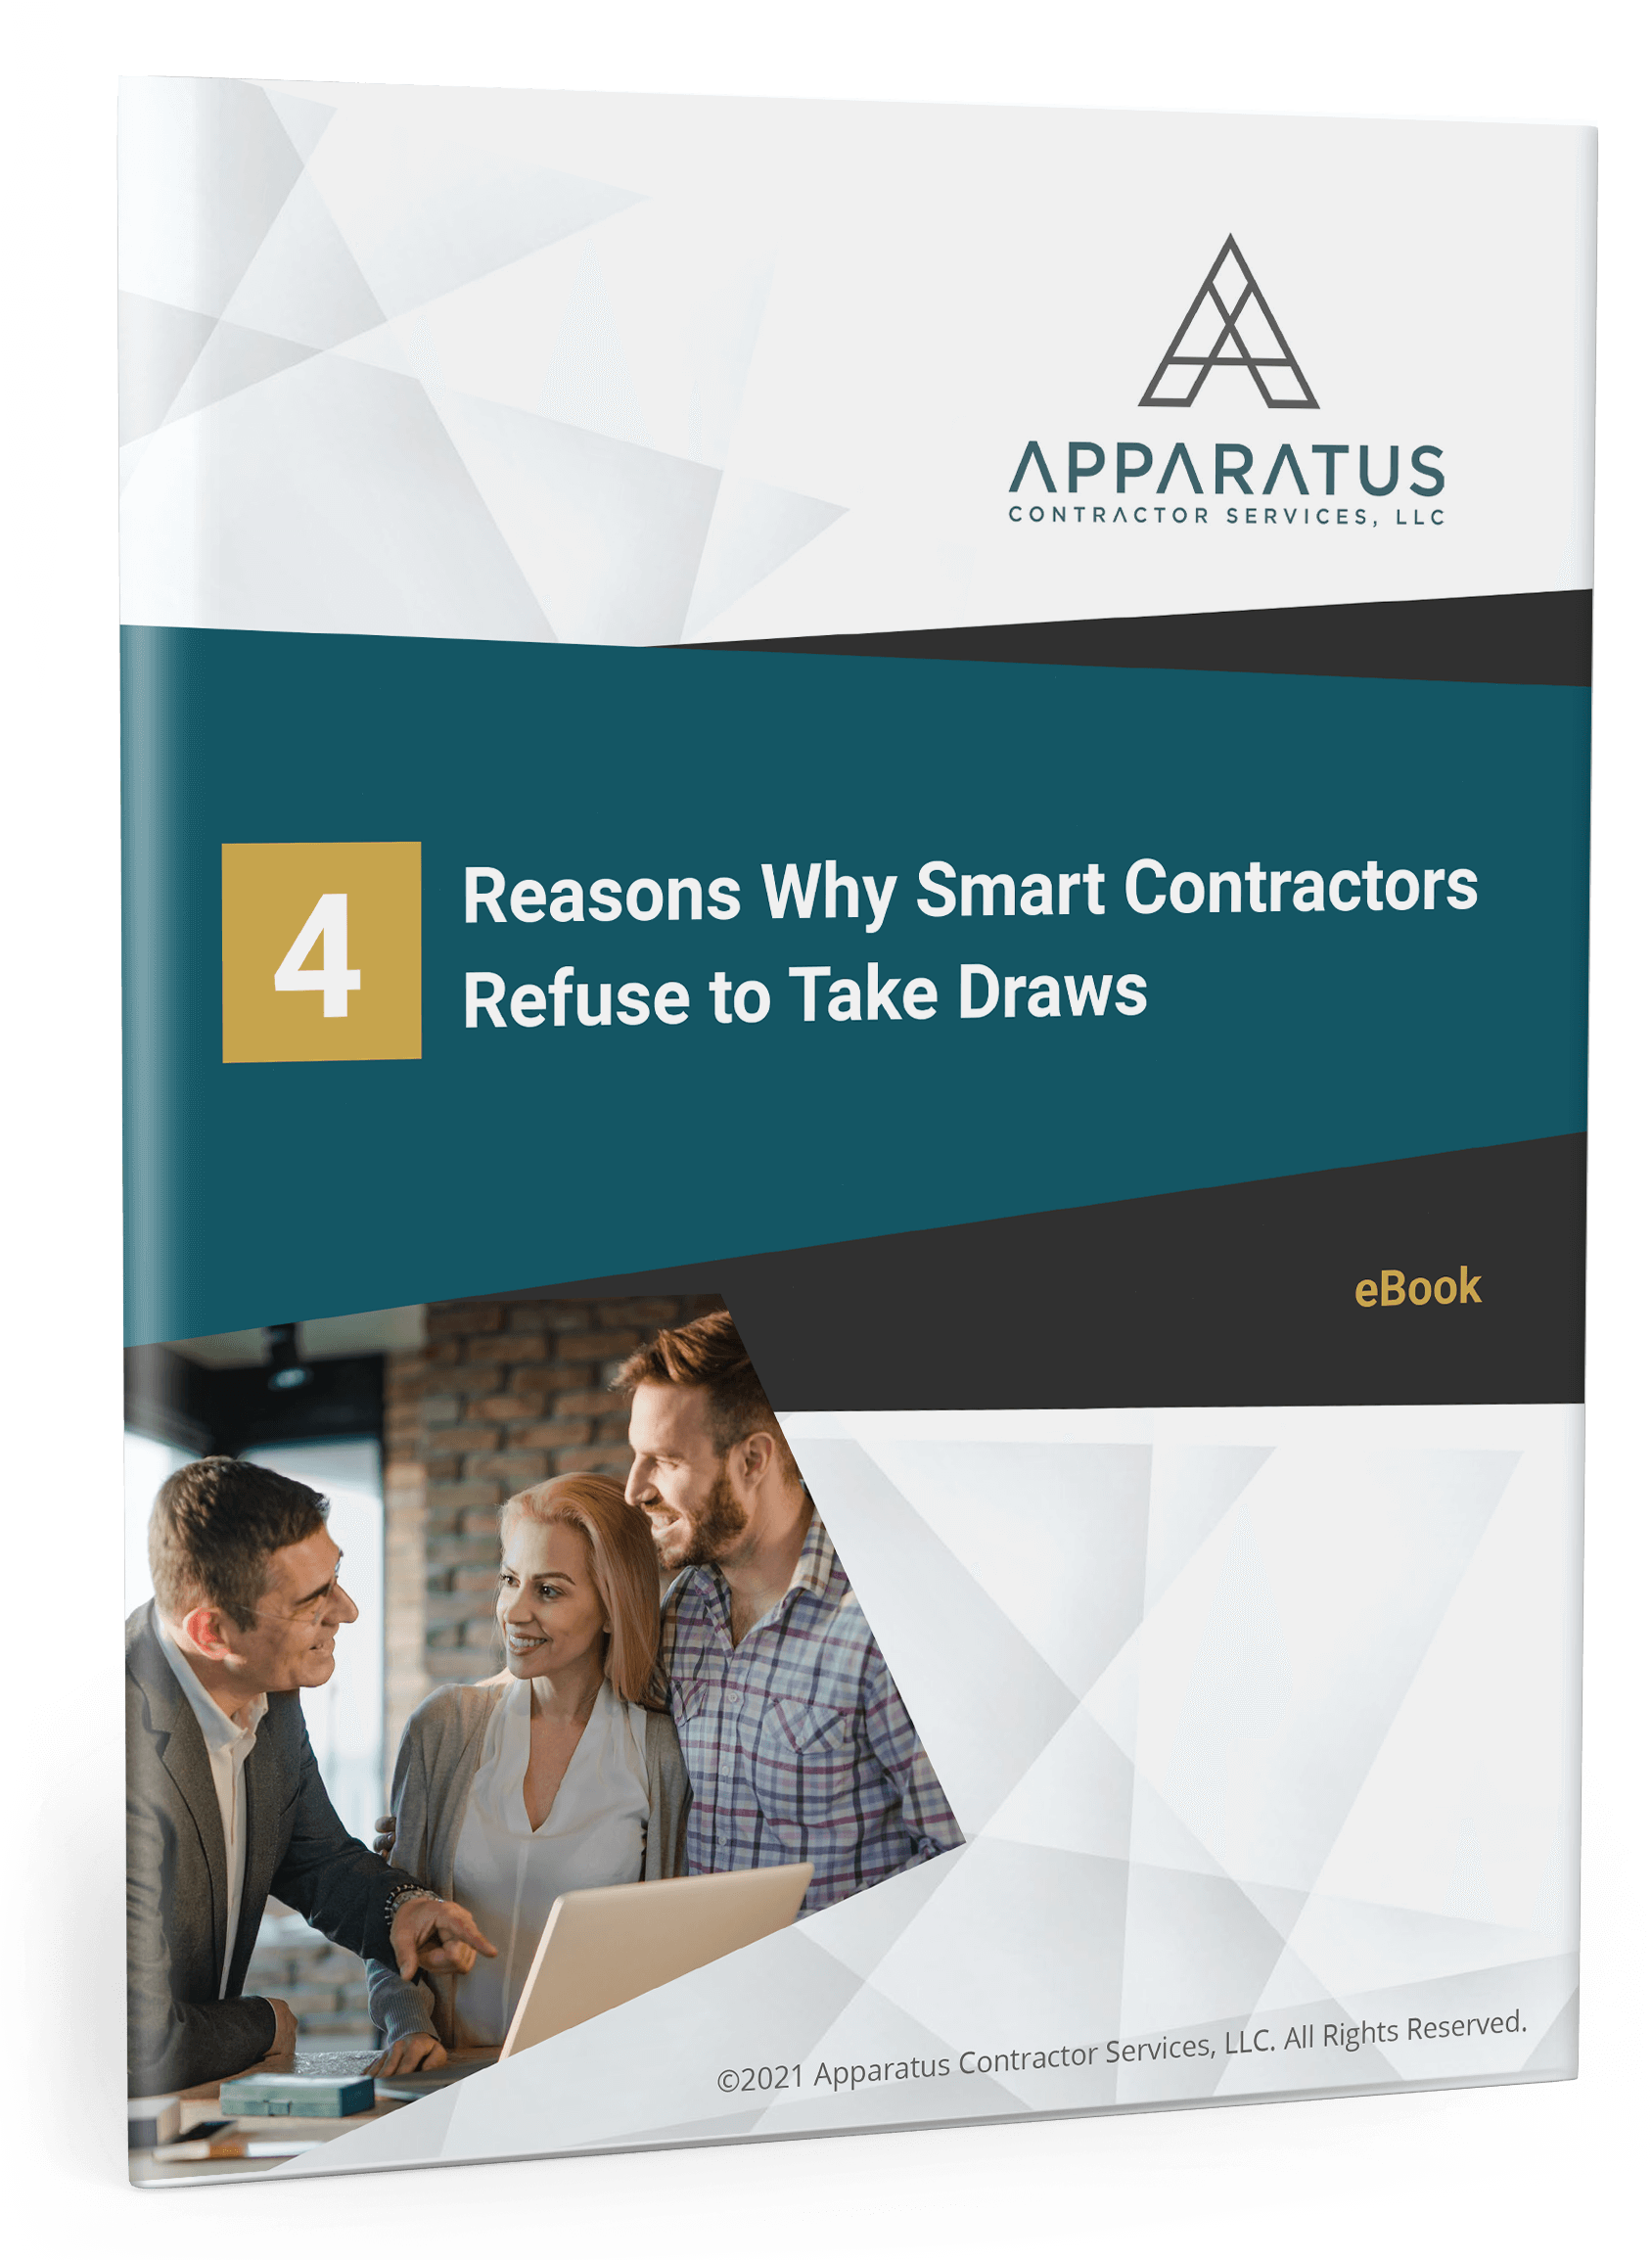 4 reasons why smart contractors refuse to take draws